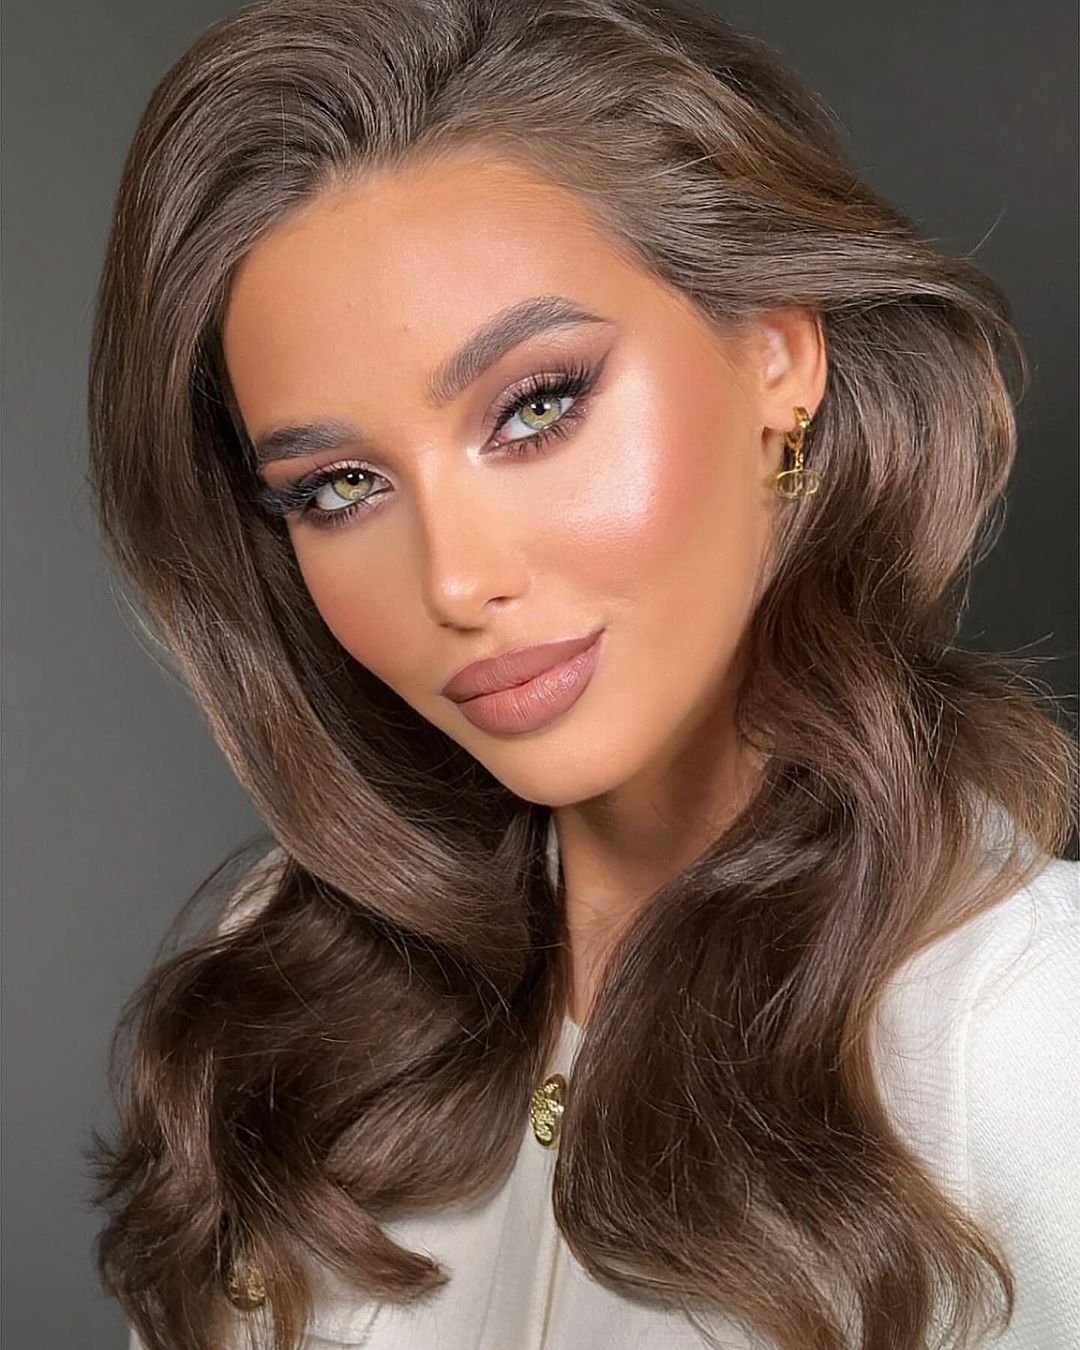 25 Cool Summer Makeup Looks: Soft, Glowy, and Natural Ideas for a Fresh ...